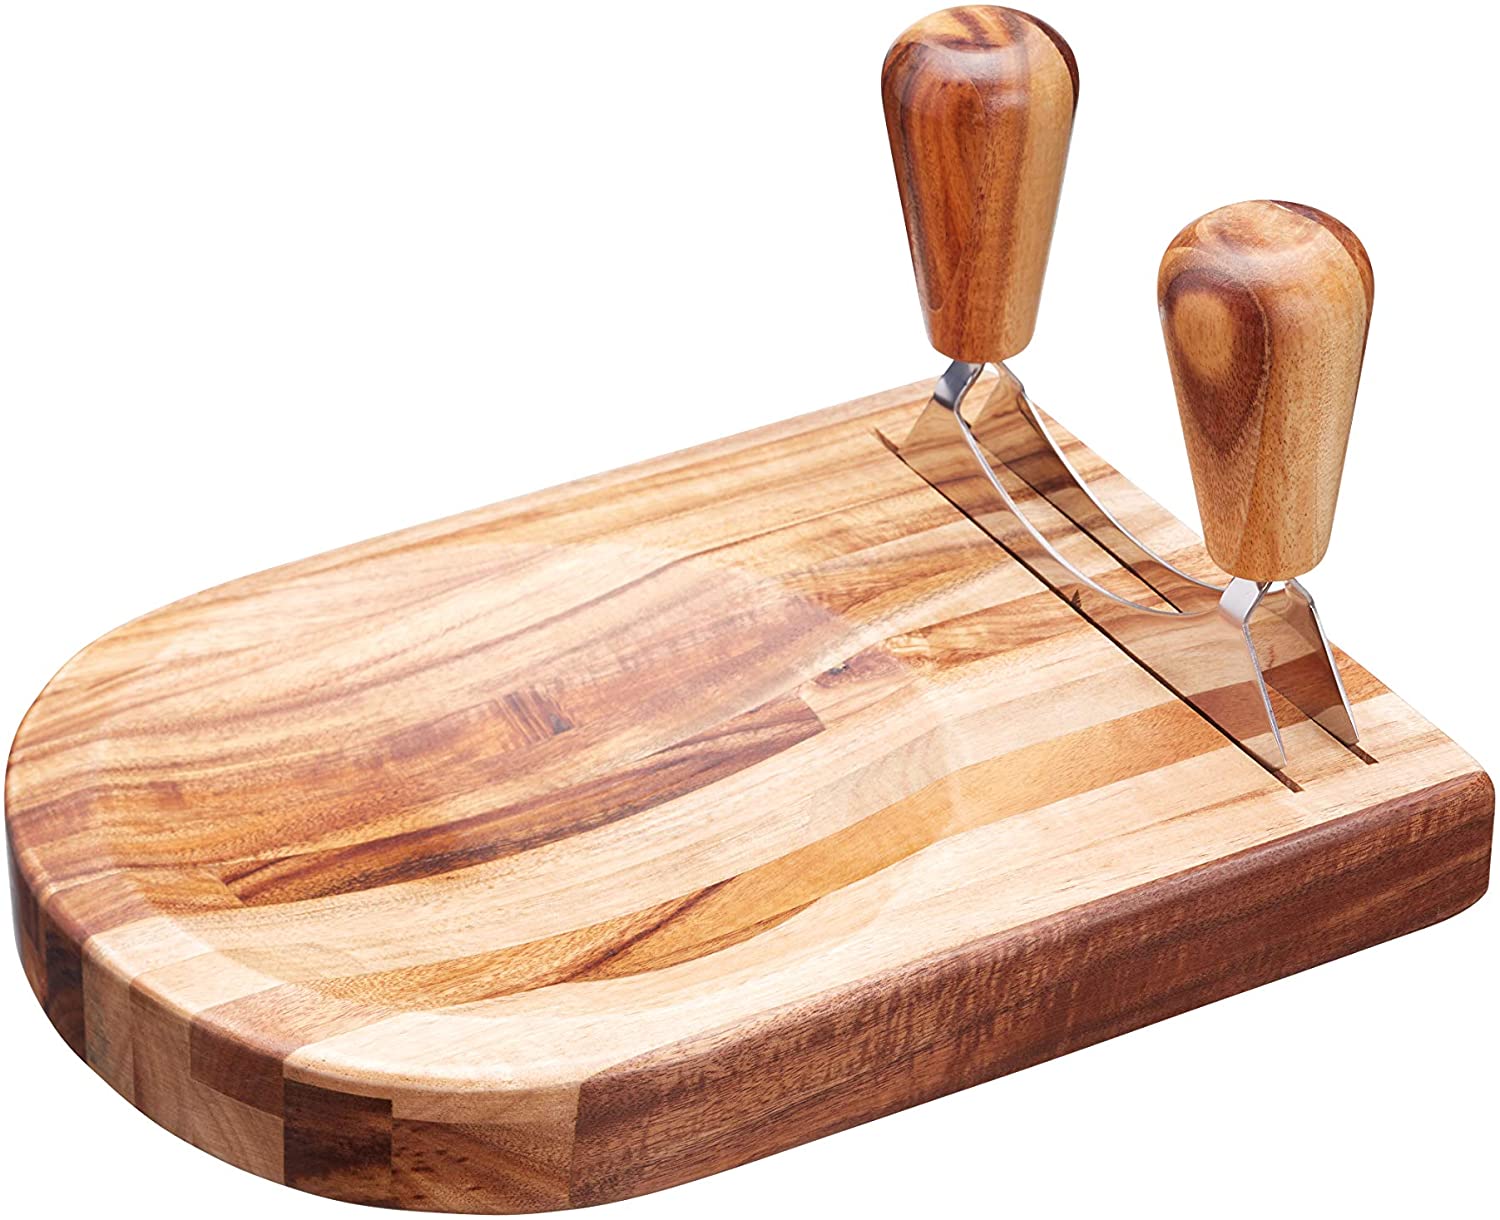 KitchenCraft Natural Elements Chopping Knife with Chopping Board, Traditional Double-Edged Mezzaluna Knife, Acacia Wood Board with Knife Holder and Cutting Holder, 14 x 18 x 25 cm